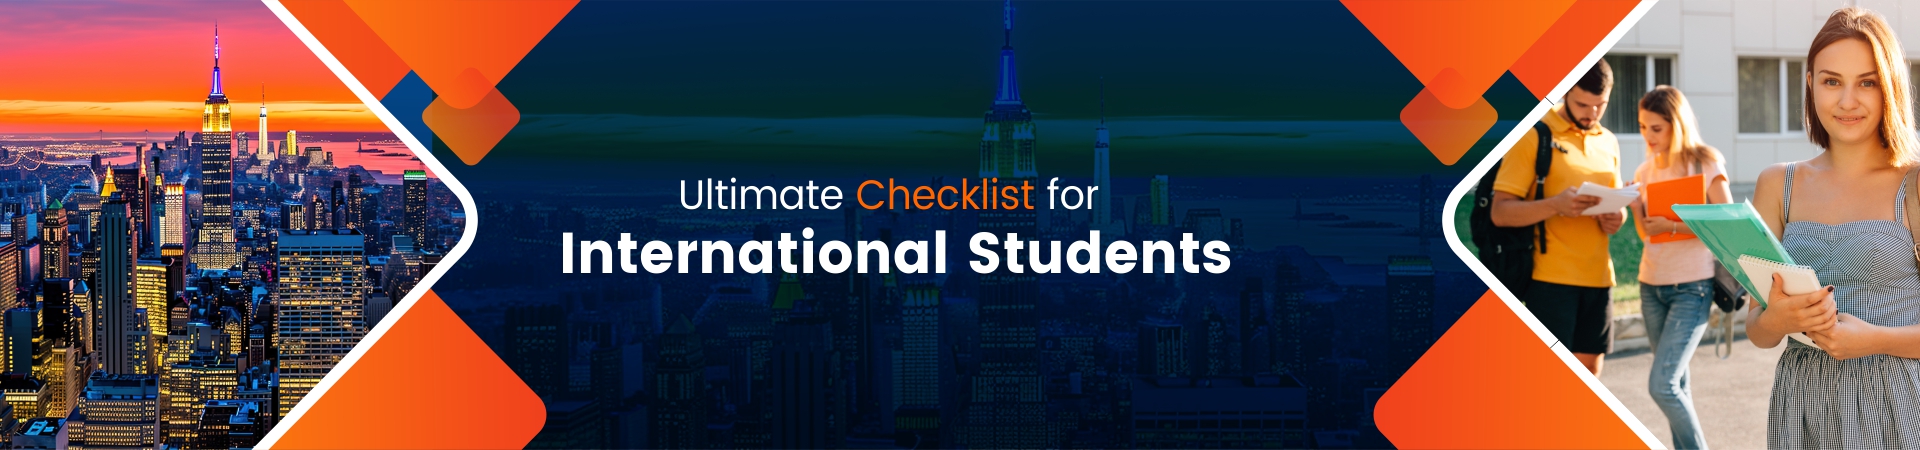 Ultimate Checklist for International Students